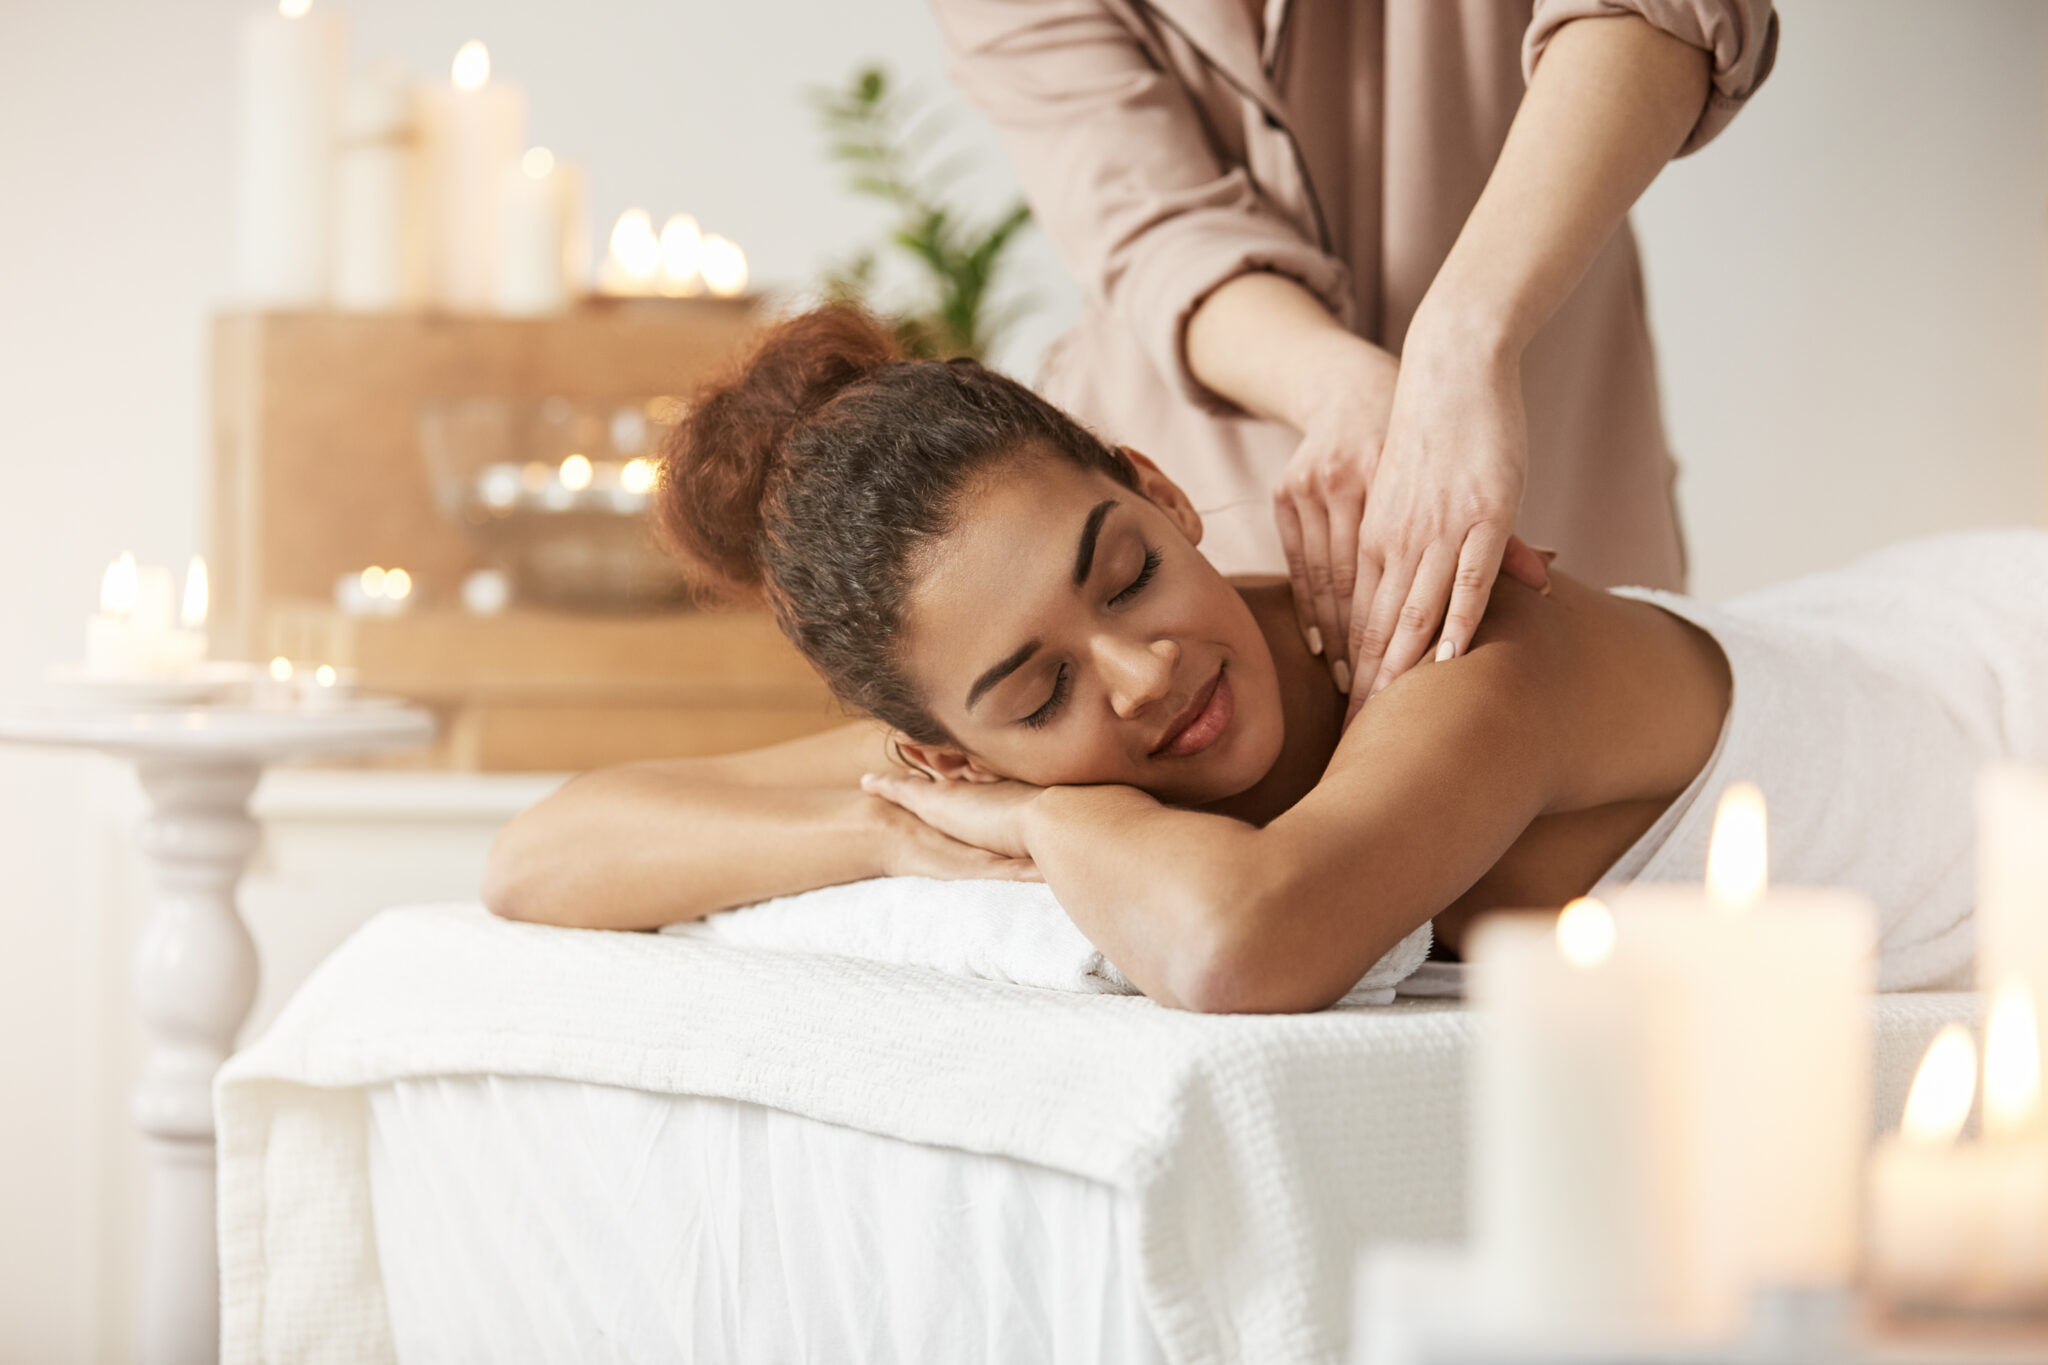 Benefits of massage for a female